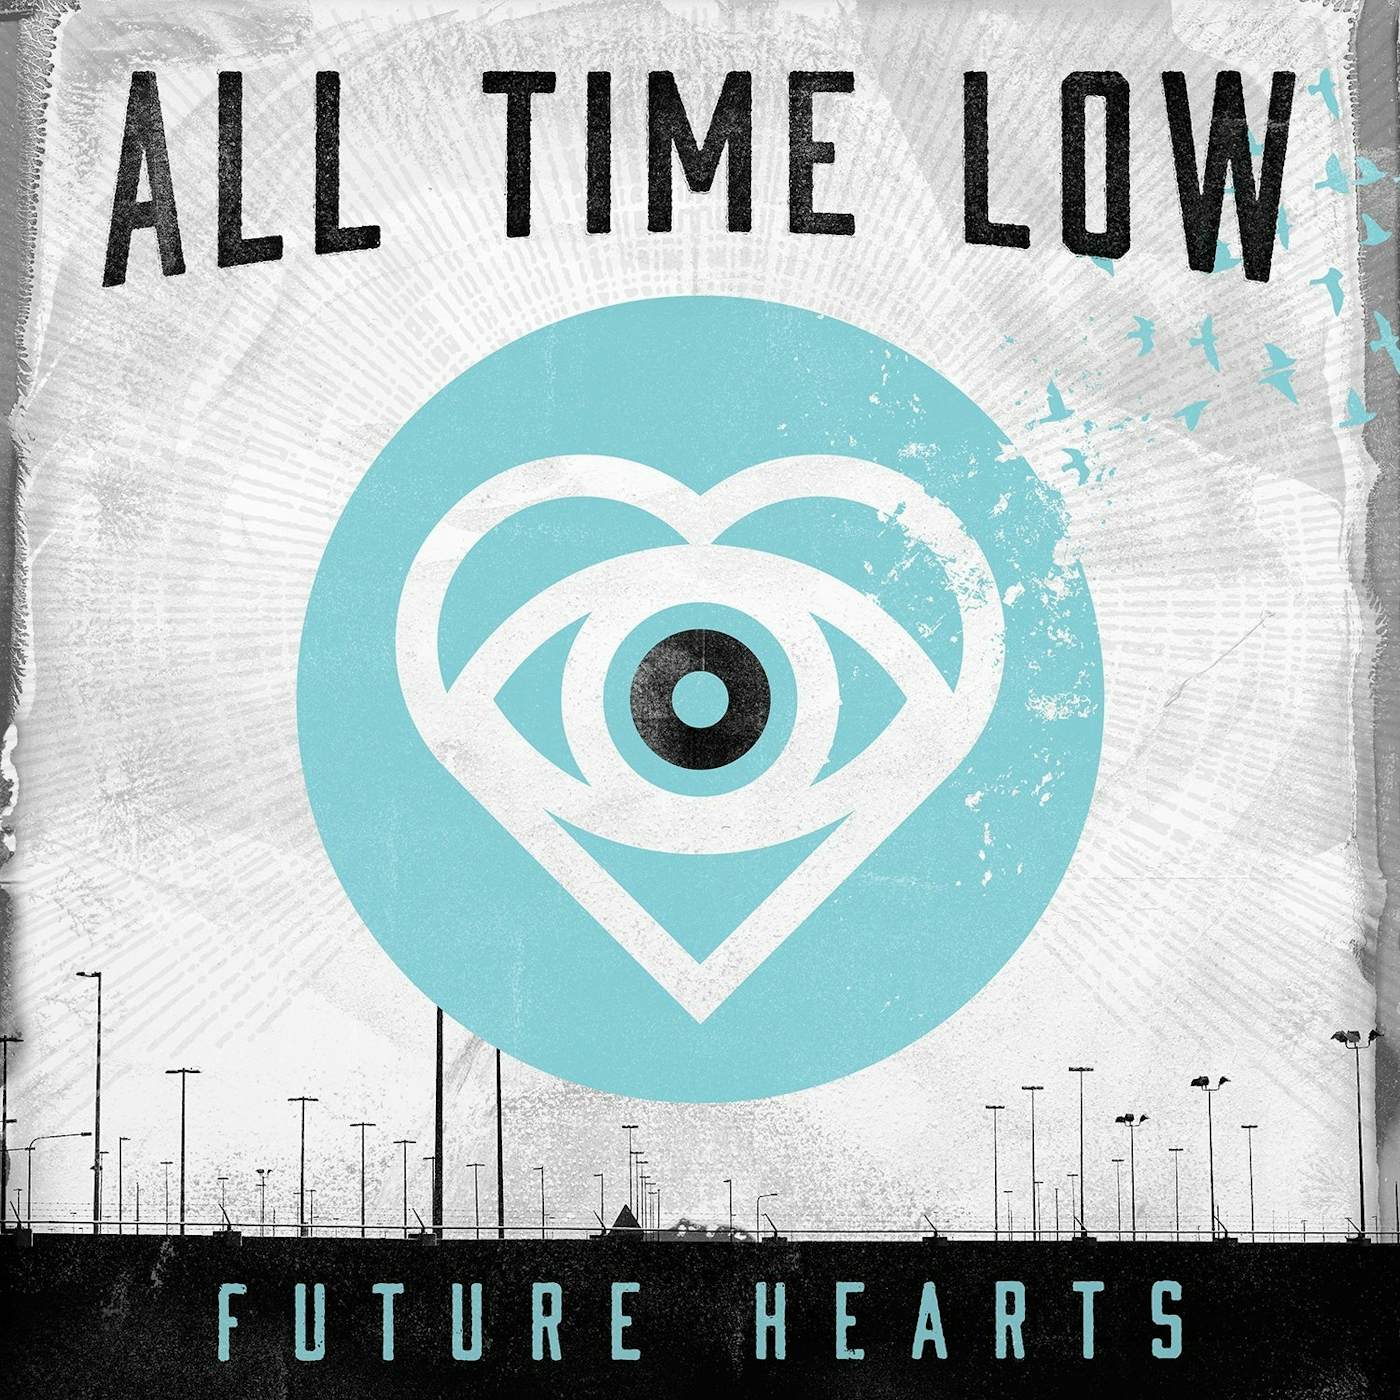 All Time Low FUTURE HEARTS - LIGHT BLUE Vinyl Record